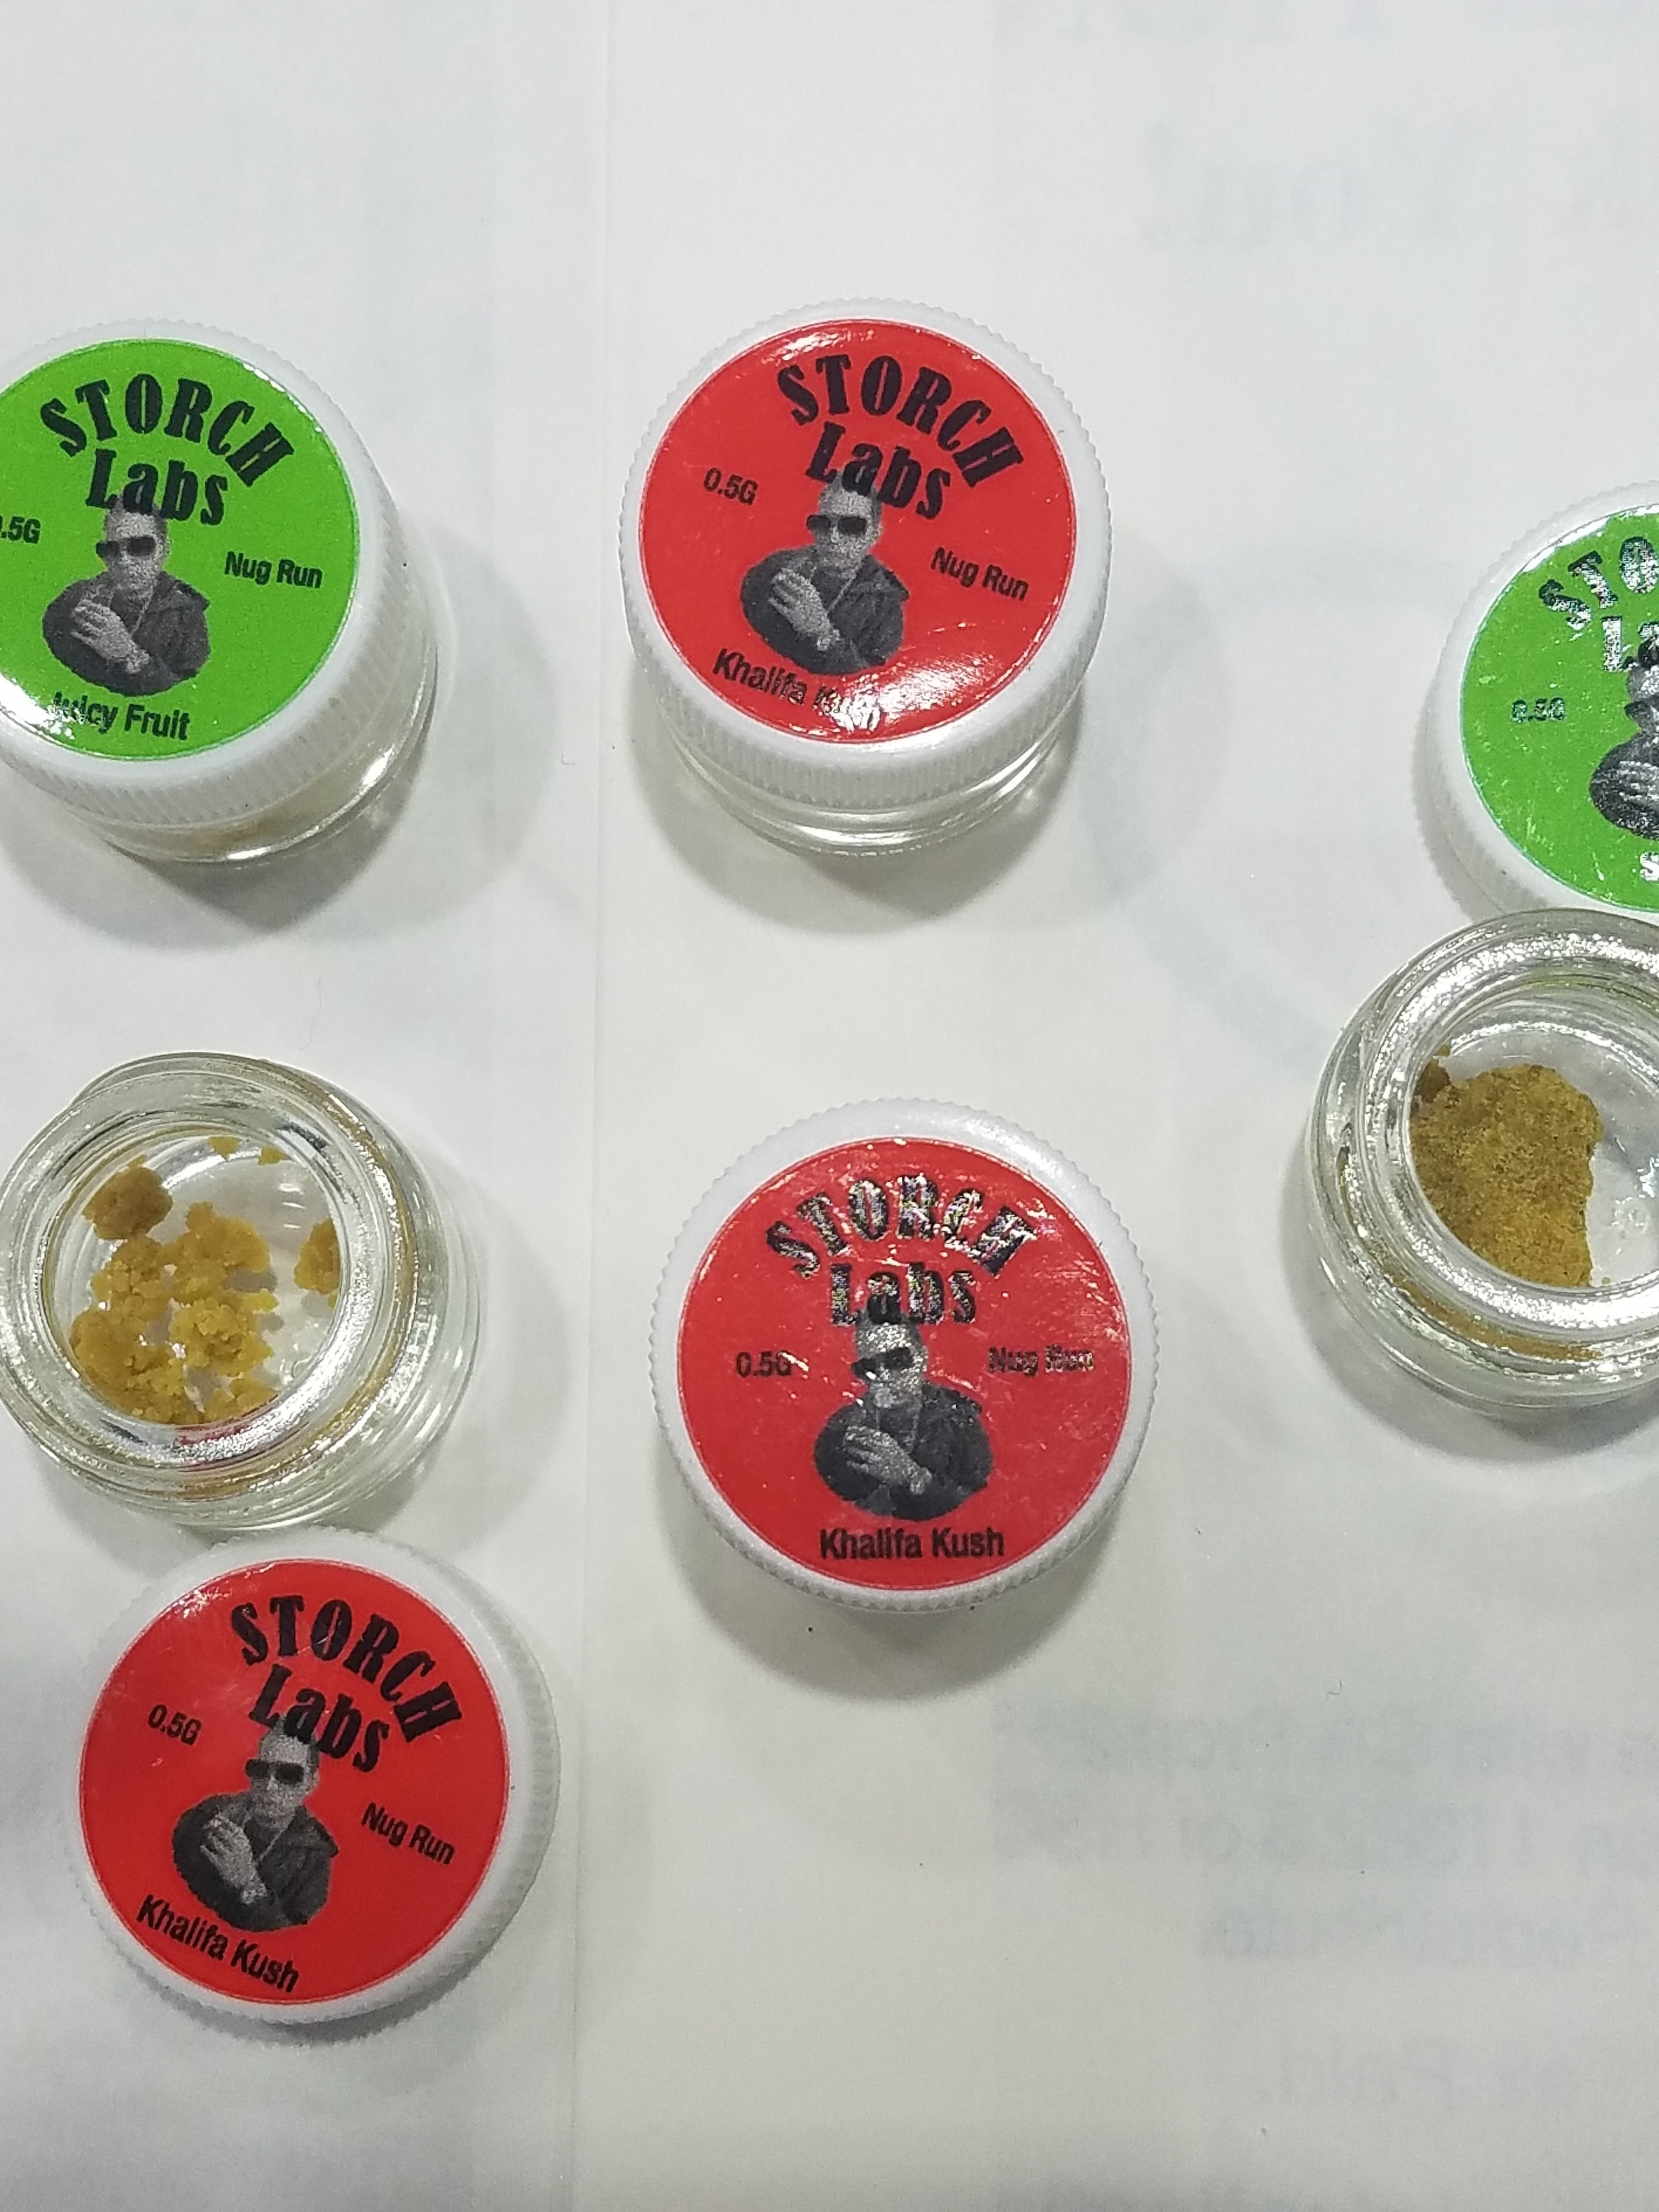 wax-storch-labs-crumble-5g